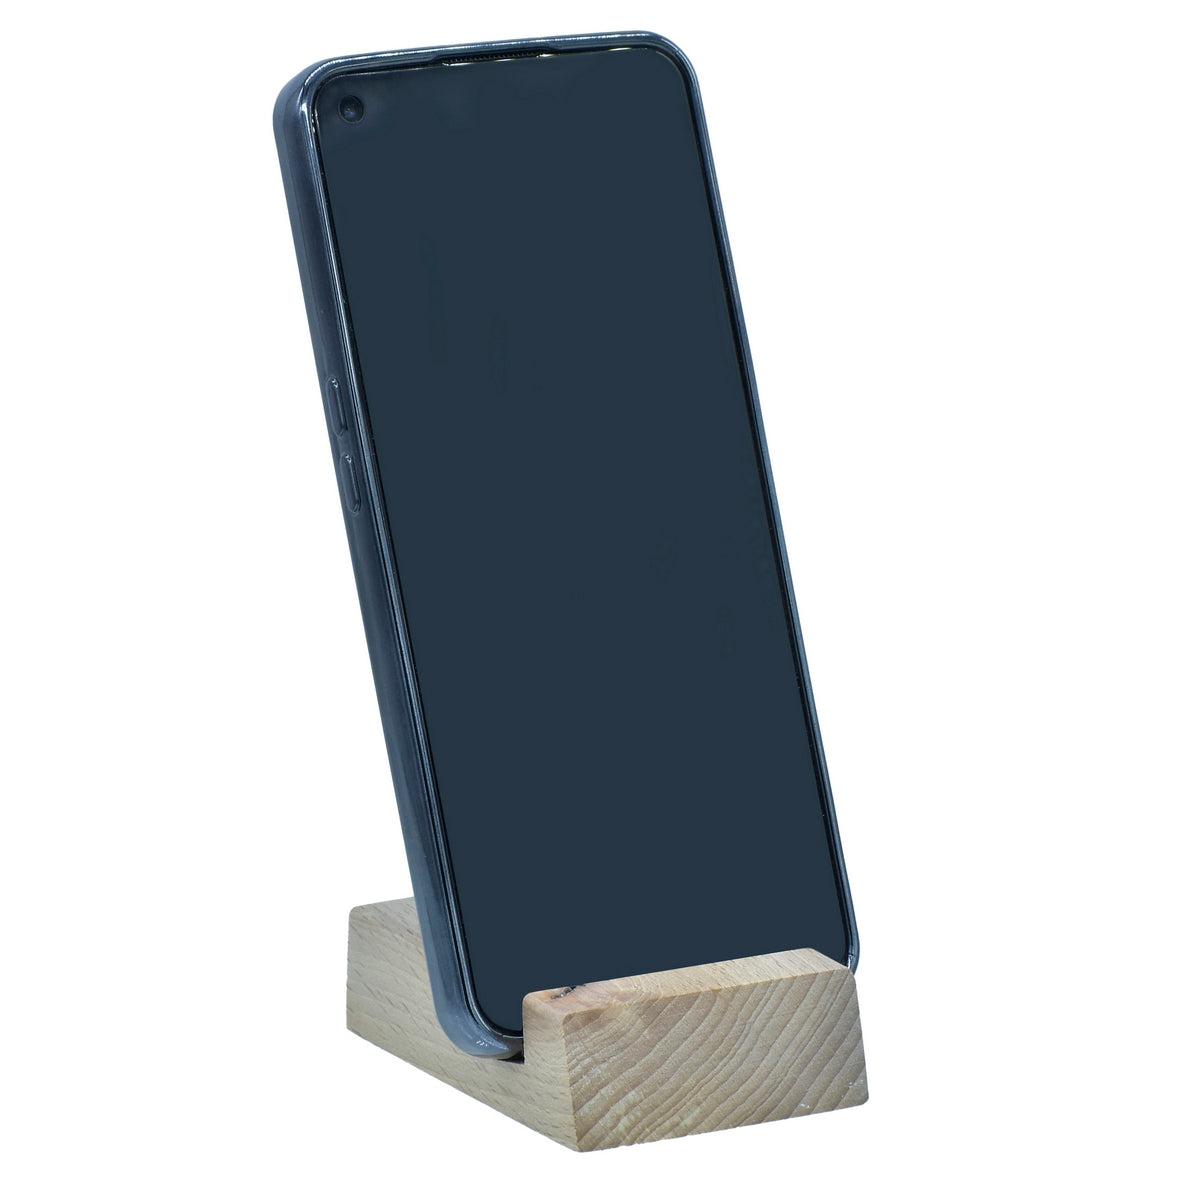 Wooden Mobile Phone Holder cum Stand - For Personal, Corporate Gifting, Return Gift, Event Gifting, Promotional Freebies JA